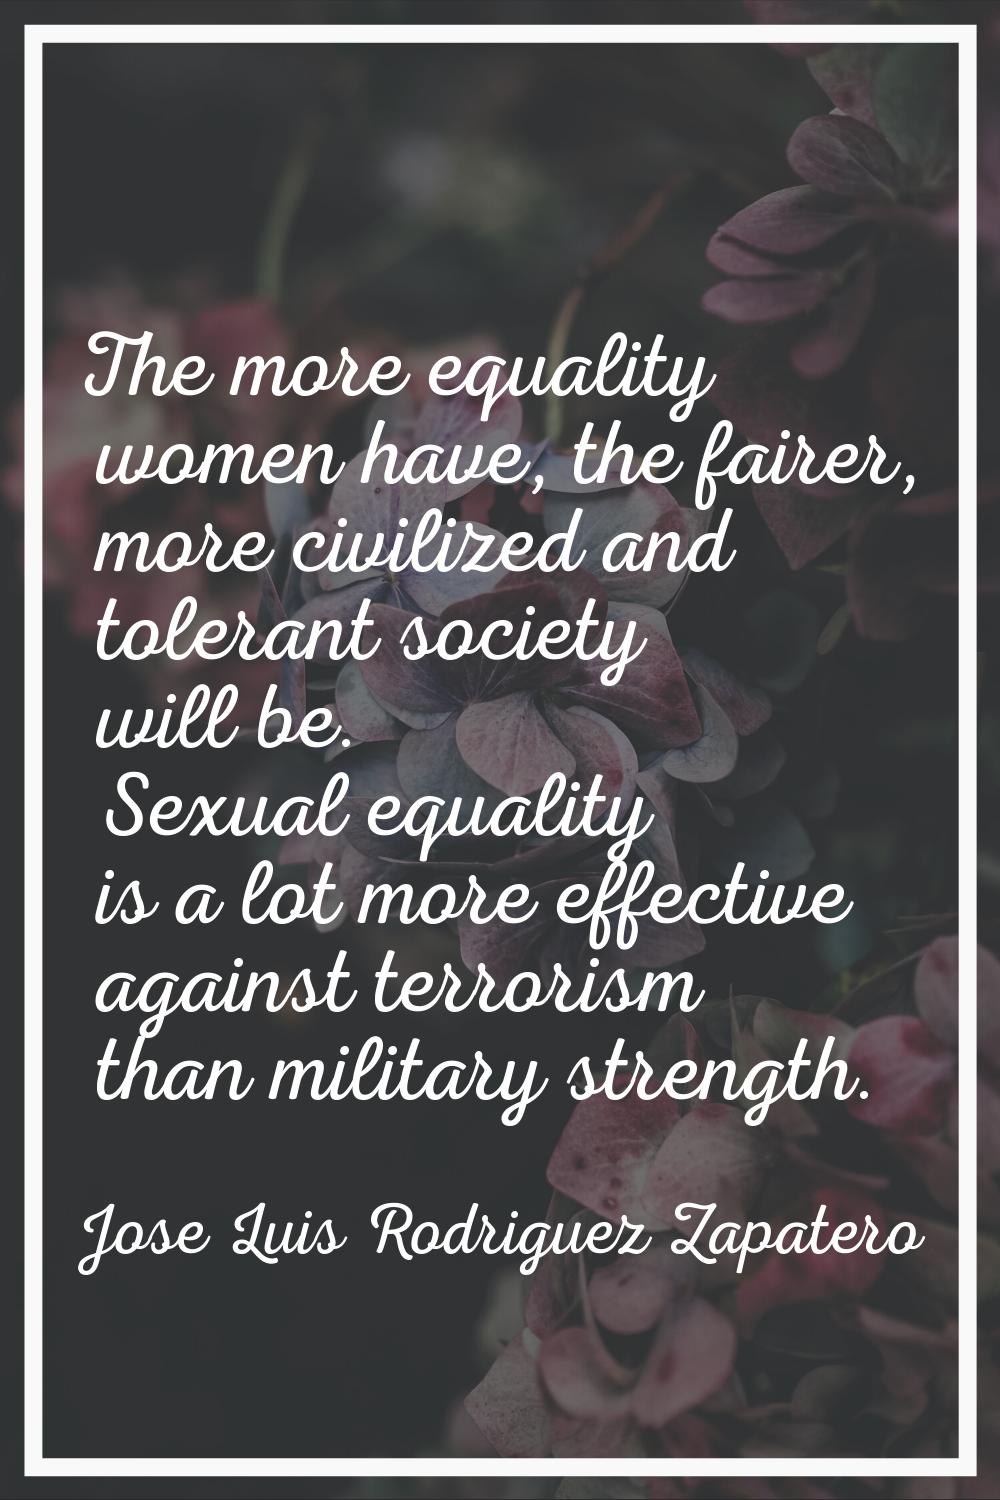 The more equality women have, the fairer, more civilized and tolerant society will be. Sexual equal